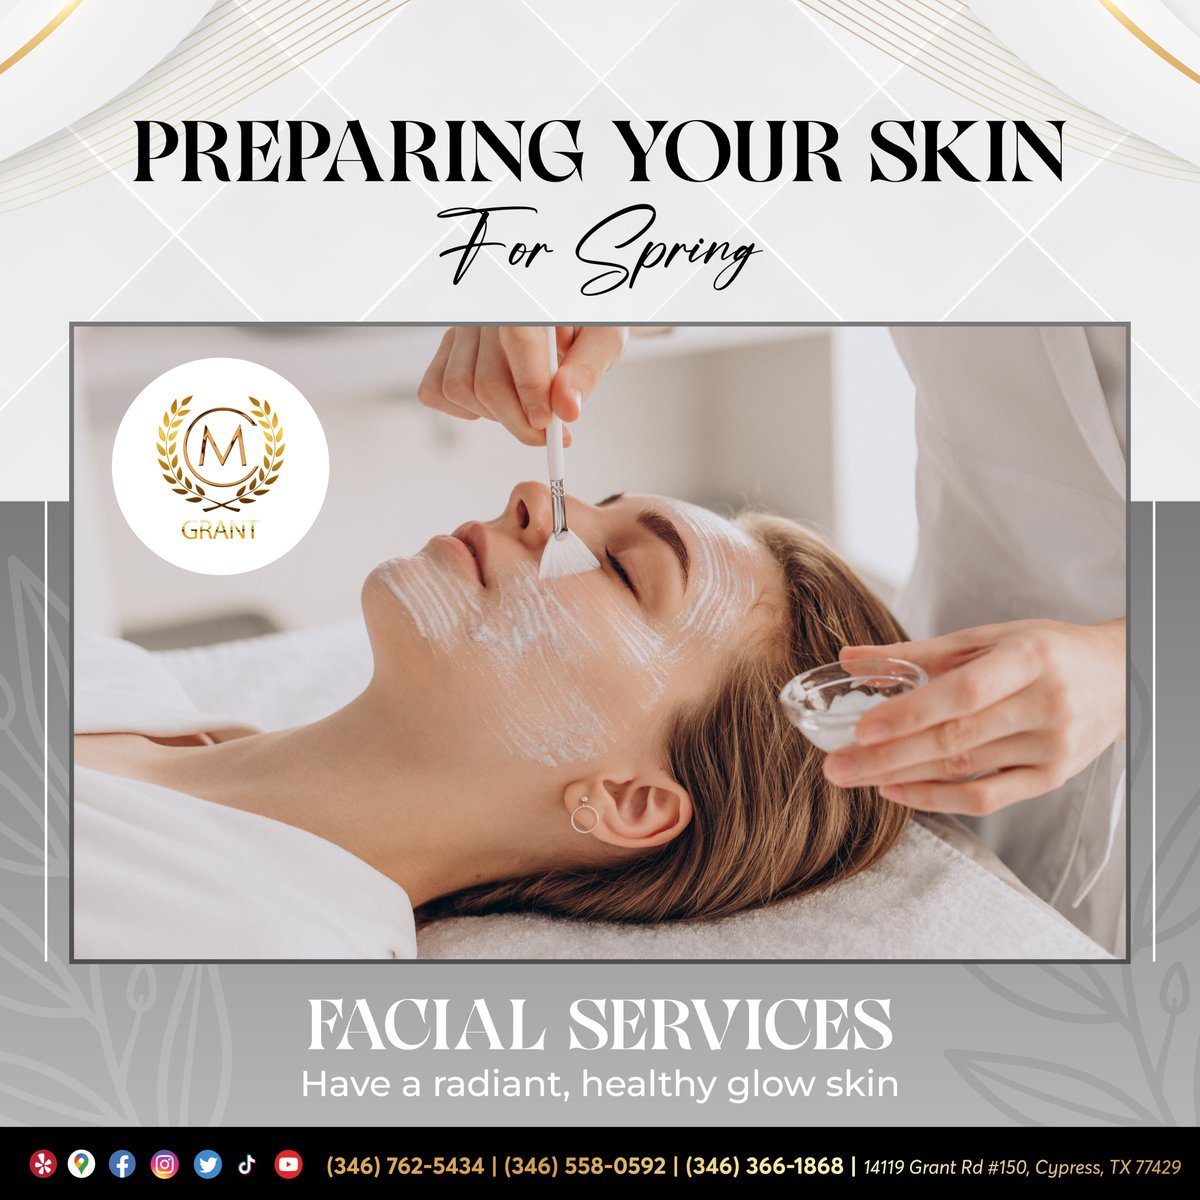 Spring Clean Your Skin
Treat yourself to a pampering Facial that will leave your skin feeling:#milanonailspagrant77429 #nailsalon77429 #grant77429 #nailsofinstagram #nails2inspire #stilletonails #coffinnails #nailsonfleek #nailsaddict #nailsart #artistsoninstagram